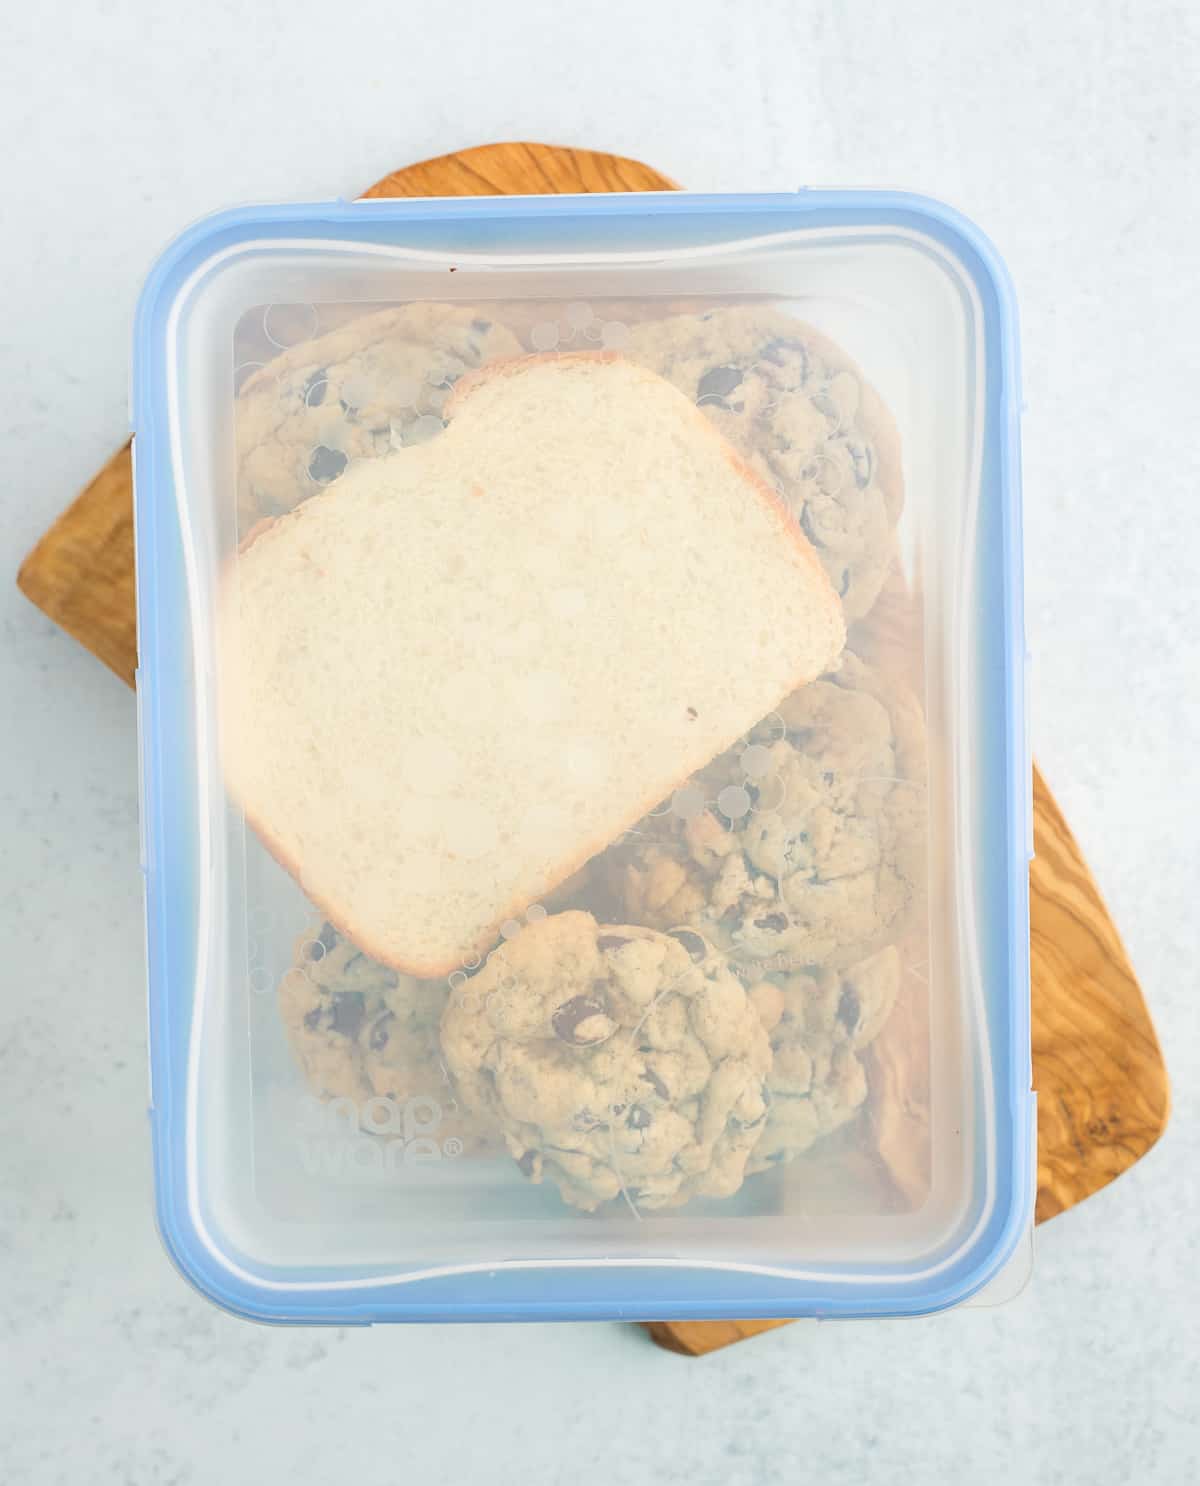 a piece of bread in a glass lidded container with cookies.